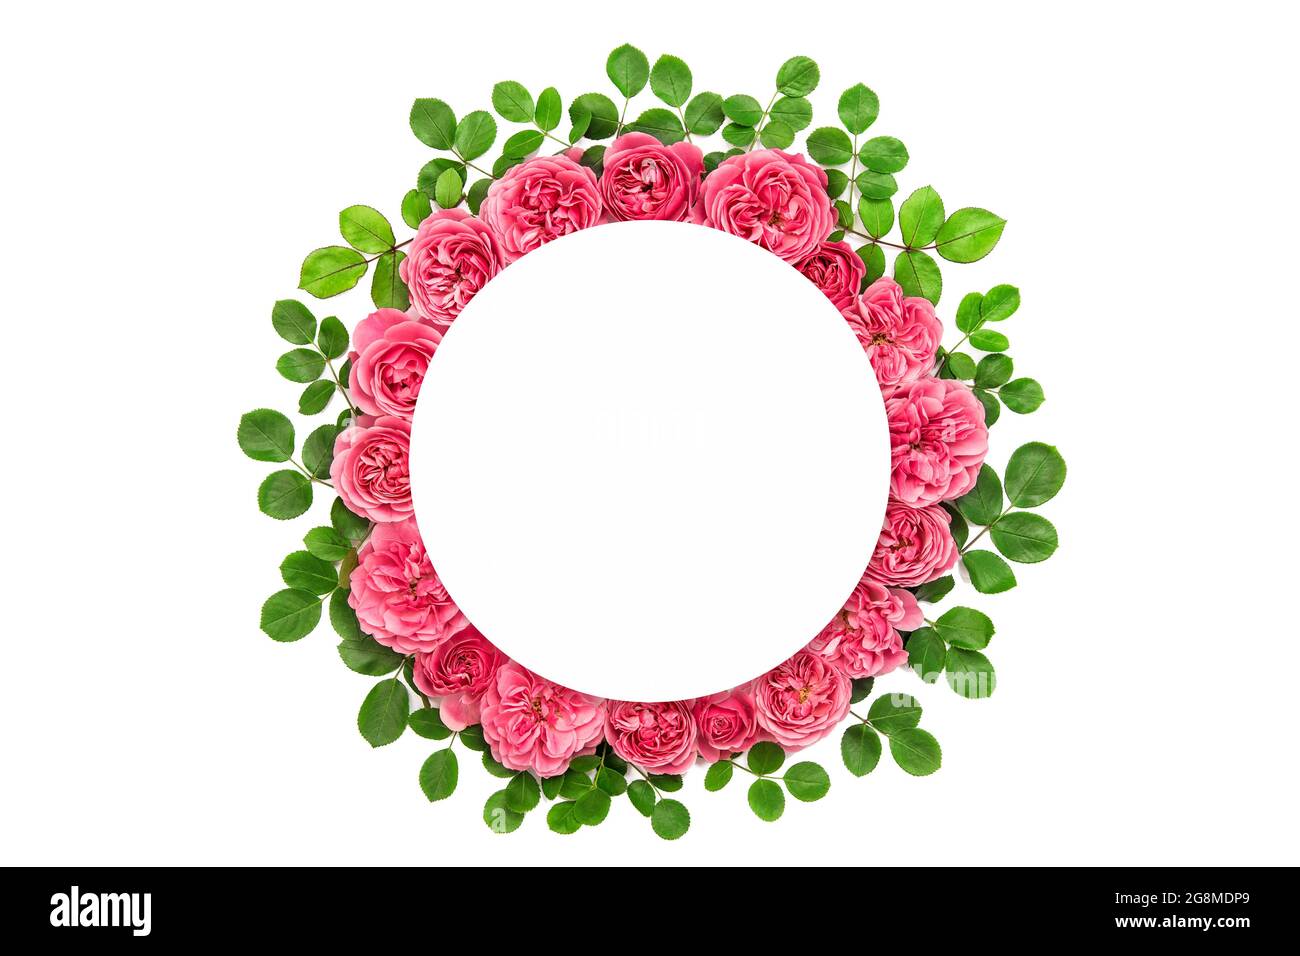 Round white paper mockup. Rose flower wreath. Roses with green leaves isolated on white background. Flower wreath Stock Photo